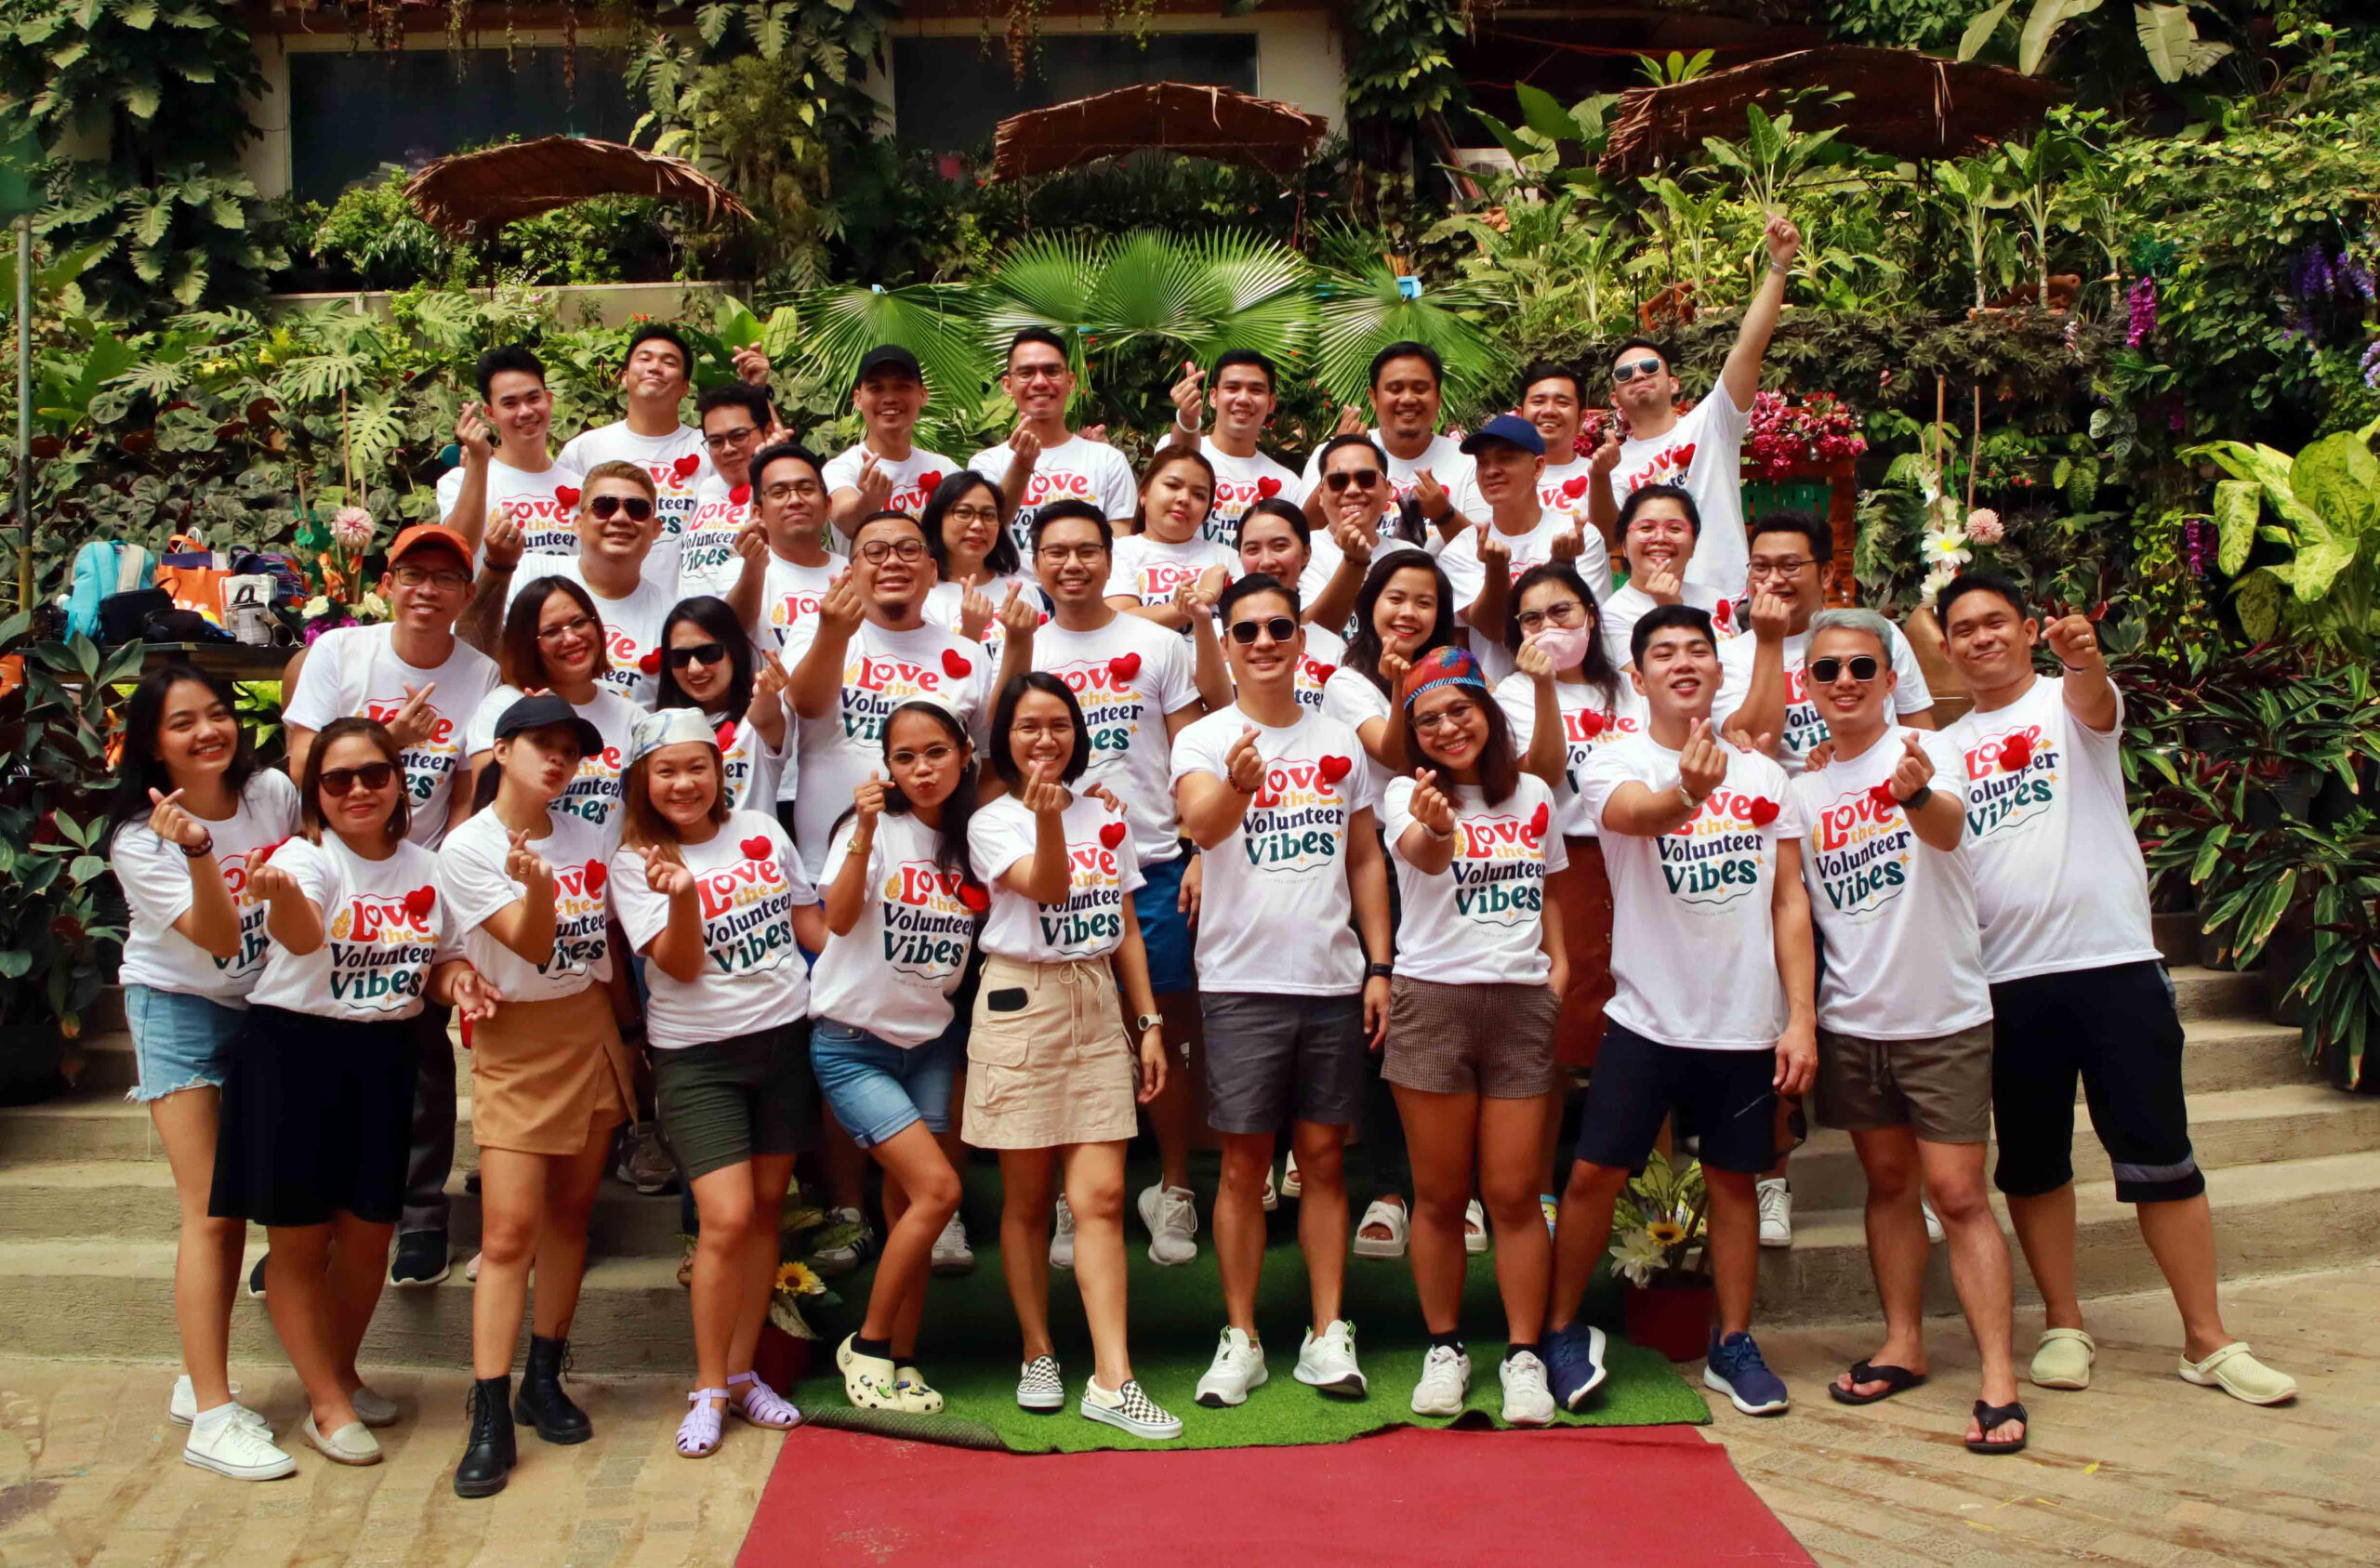 Nonprofit group I am MAD launches ‘Love the Volunteer Vibes’ campaign in Davao